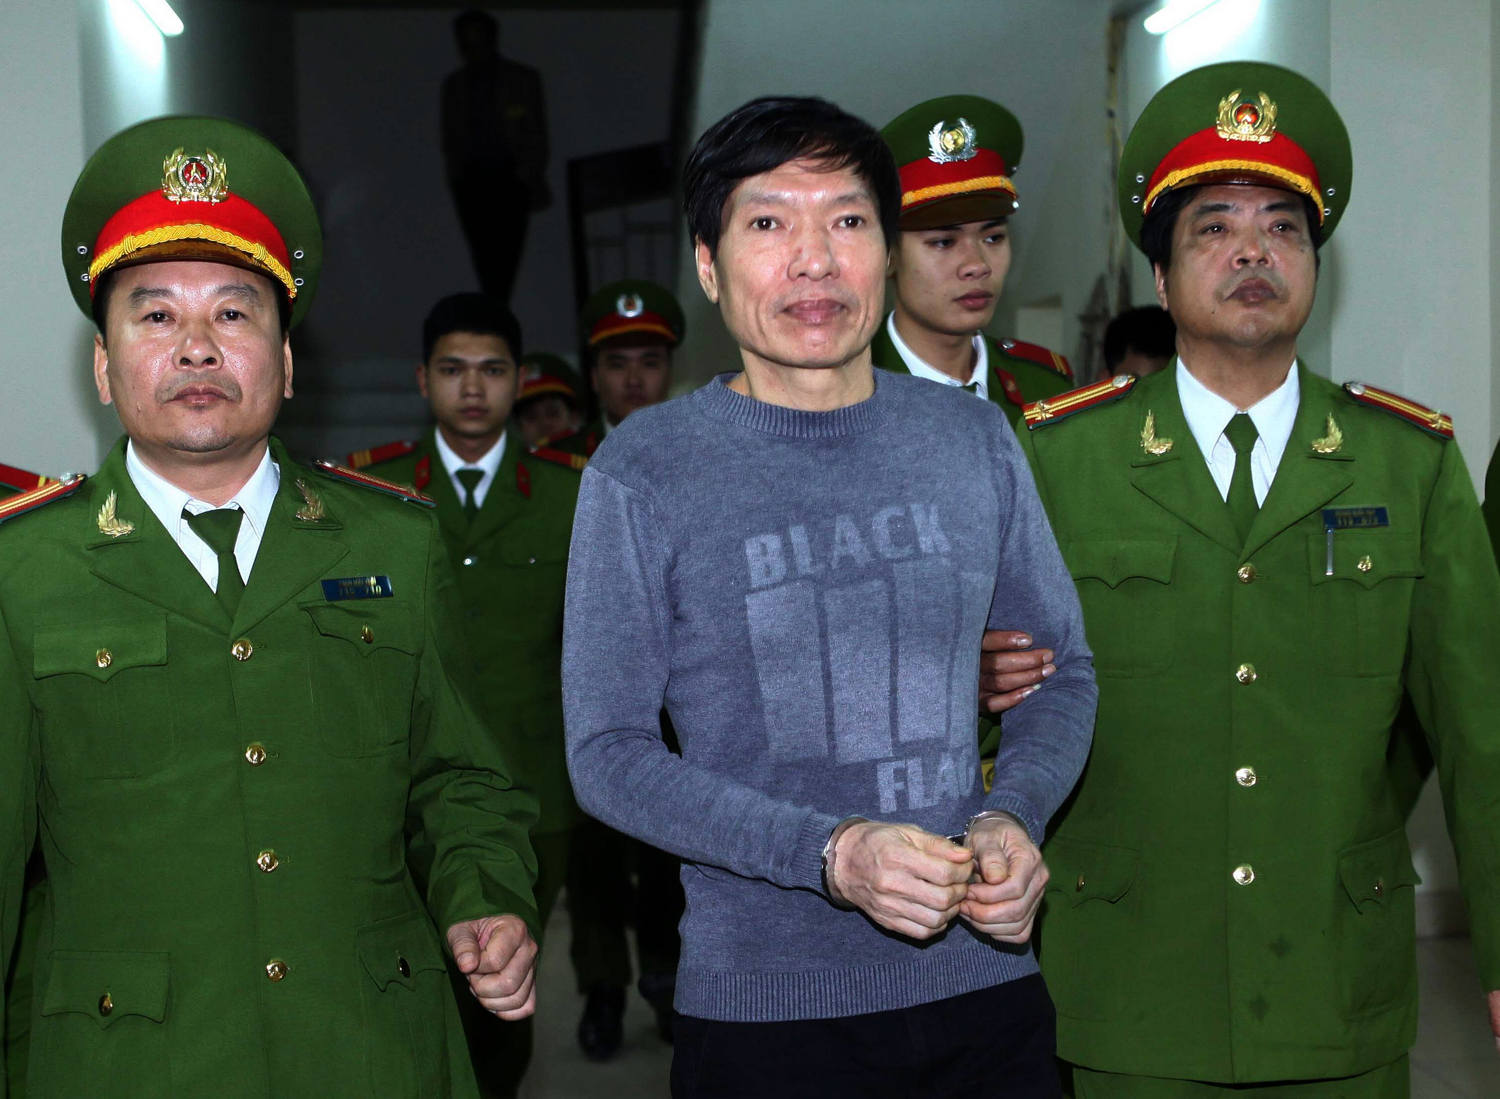 Former police Colonel Duong Tu Trong (C) is led away from the courtroom after he was sentenced to 18 years in jail by Hanoi's People's Court on January 8, 2014. (AFP/Getty Images)